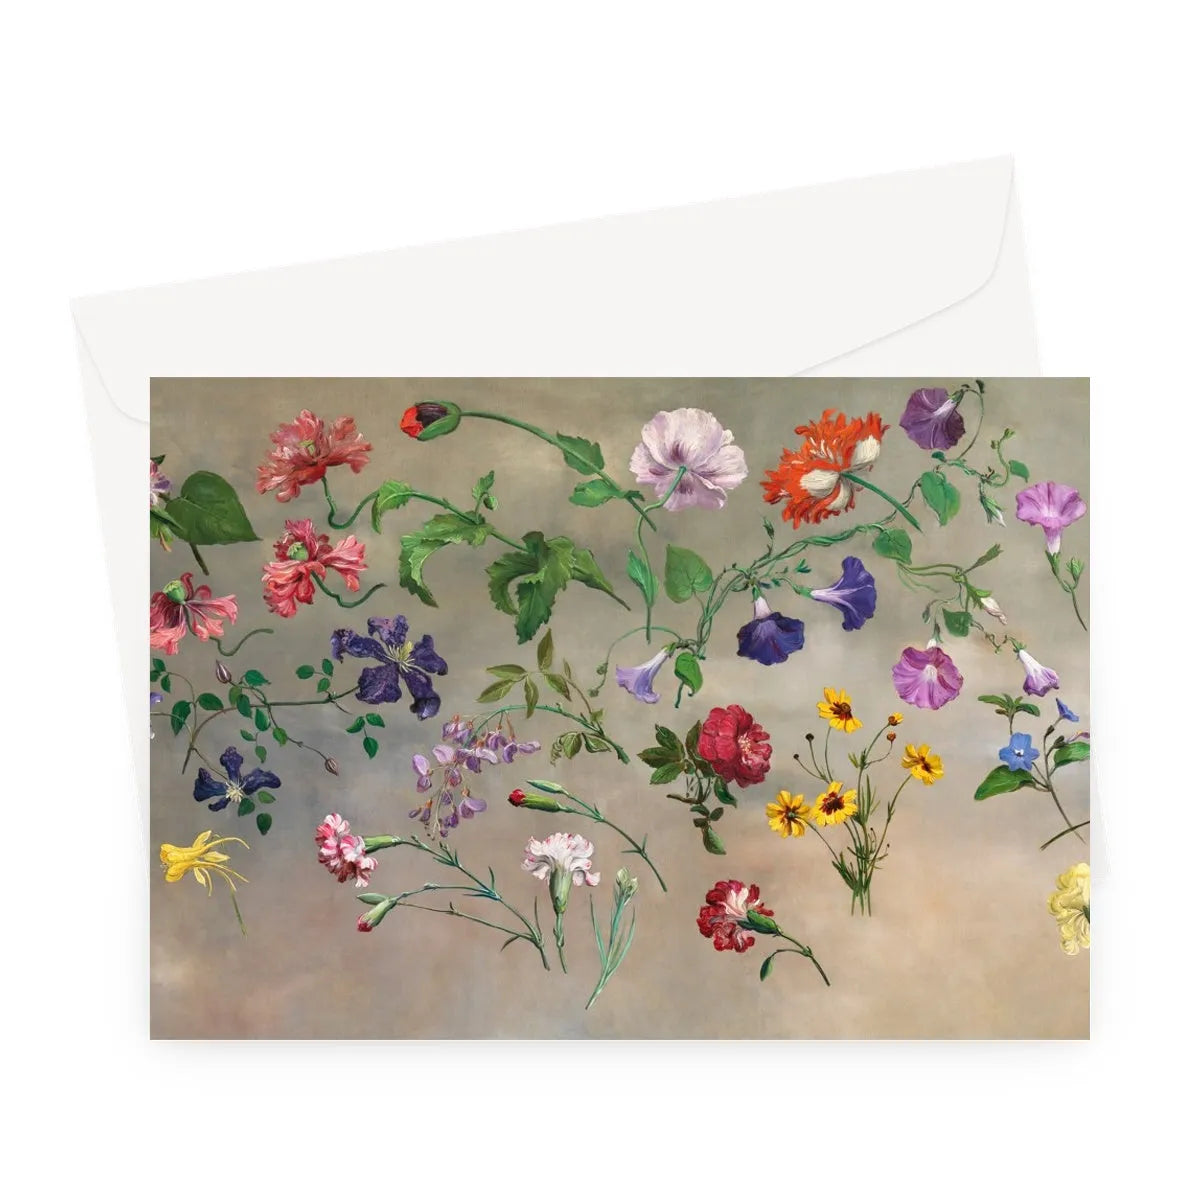 Studies Of Flowers By Jacques–laurent Agasse Greeting Card - A5 Landscape / 1 Card - Greeting & Note Cards